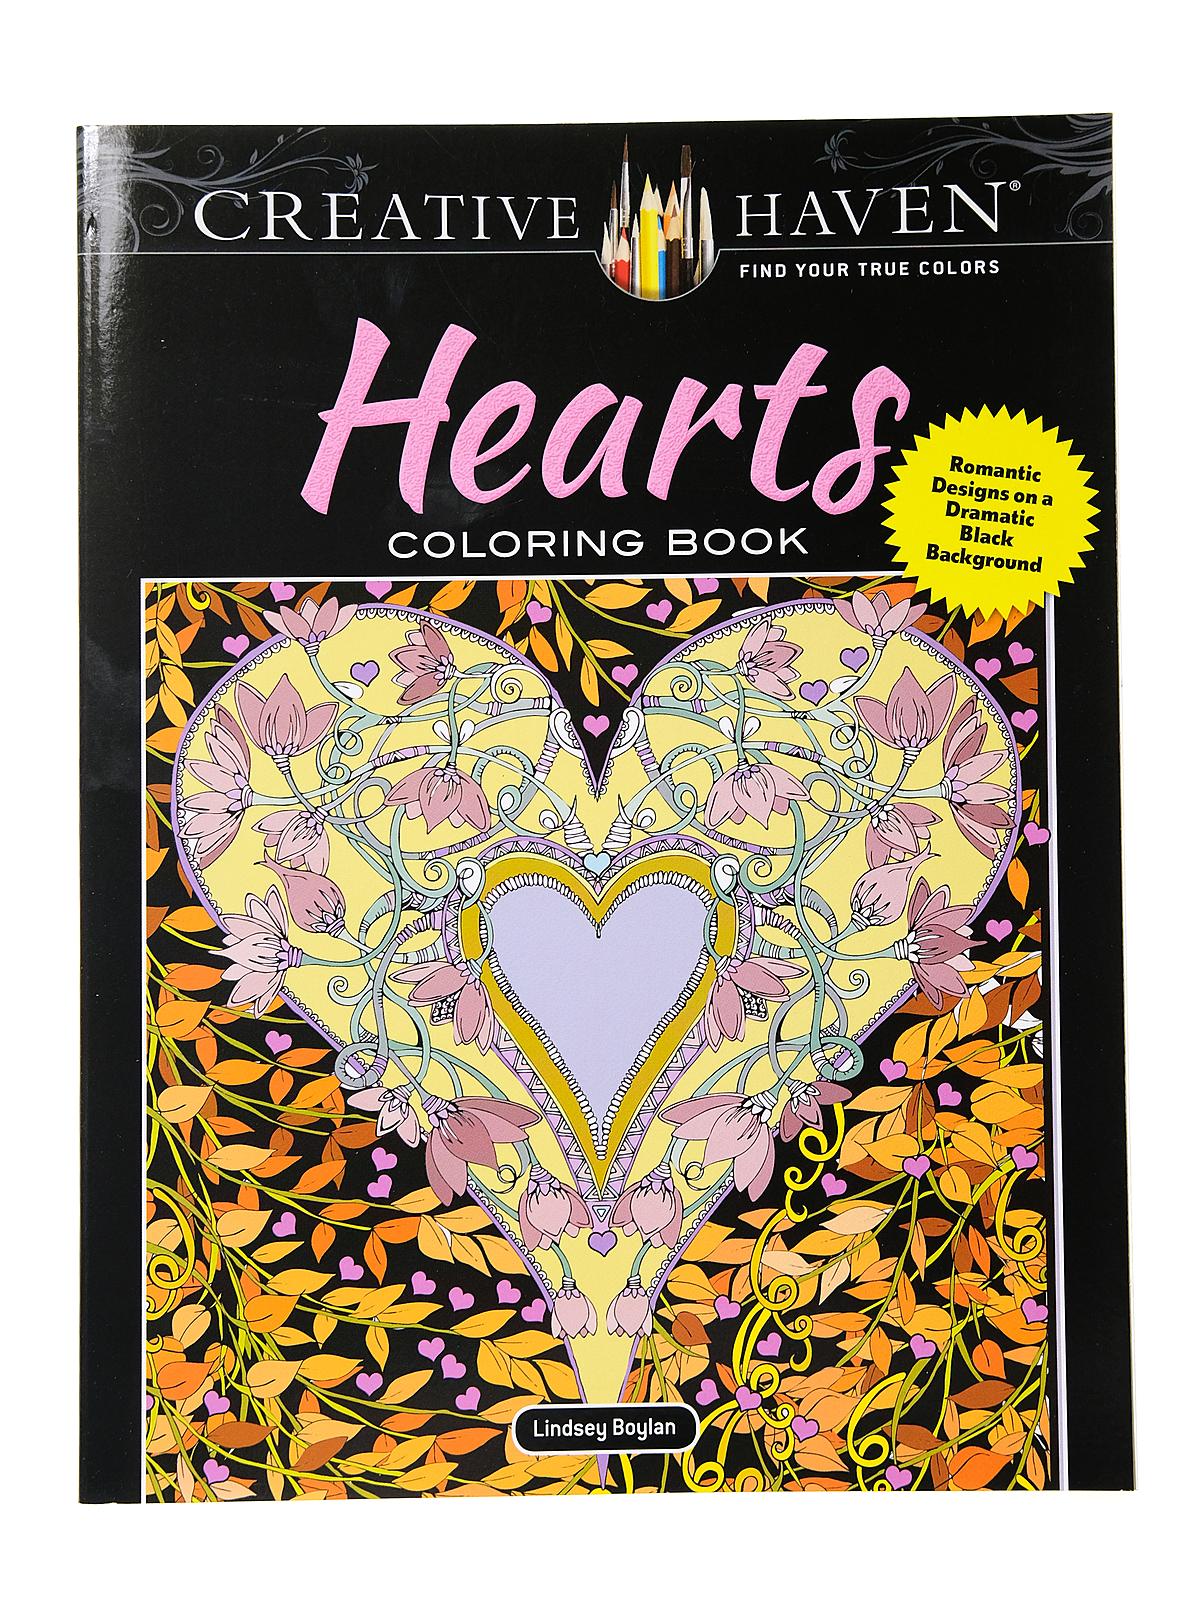 Creative Haven Dramatic Black Background Coloring Books Hearts